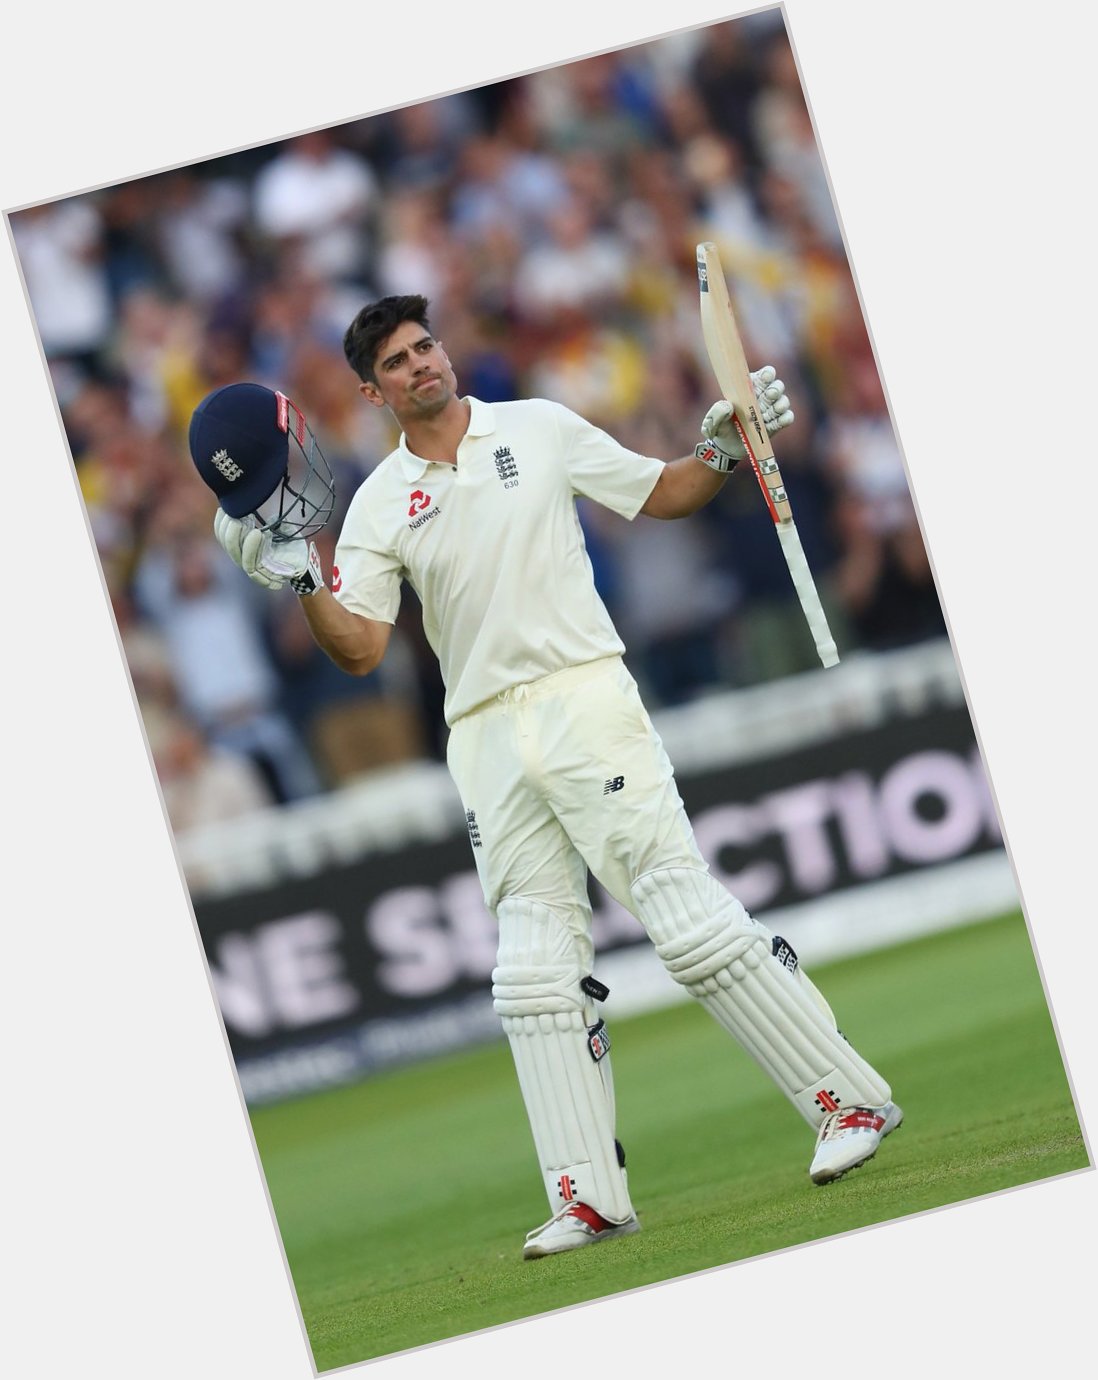 Happy Birthday to England\s all time leading run scorer in Tests, Alastair Cook!  